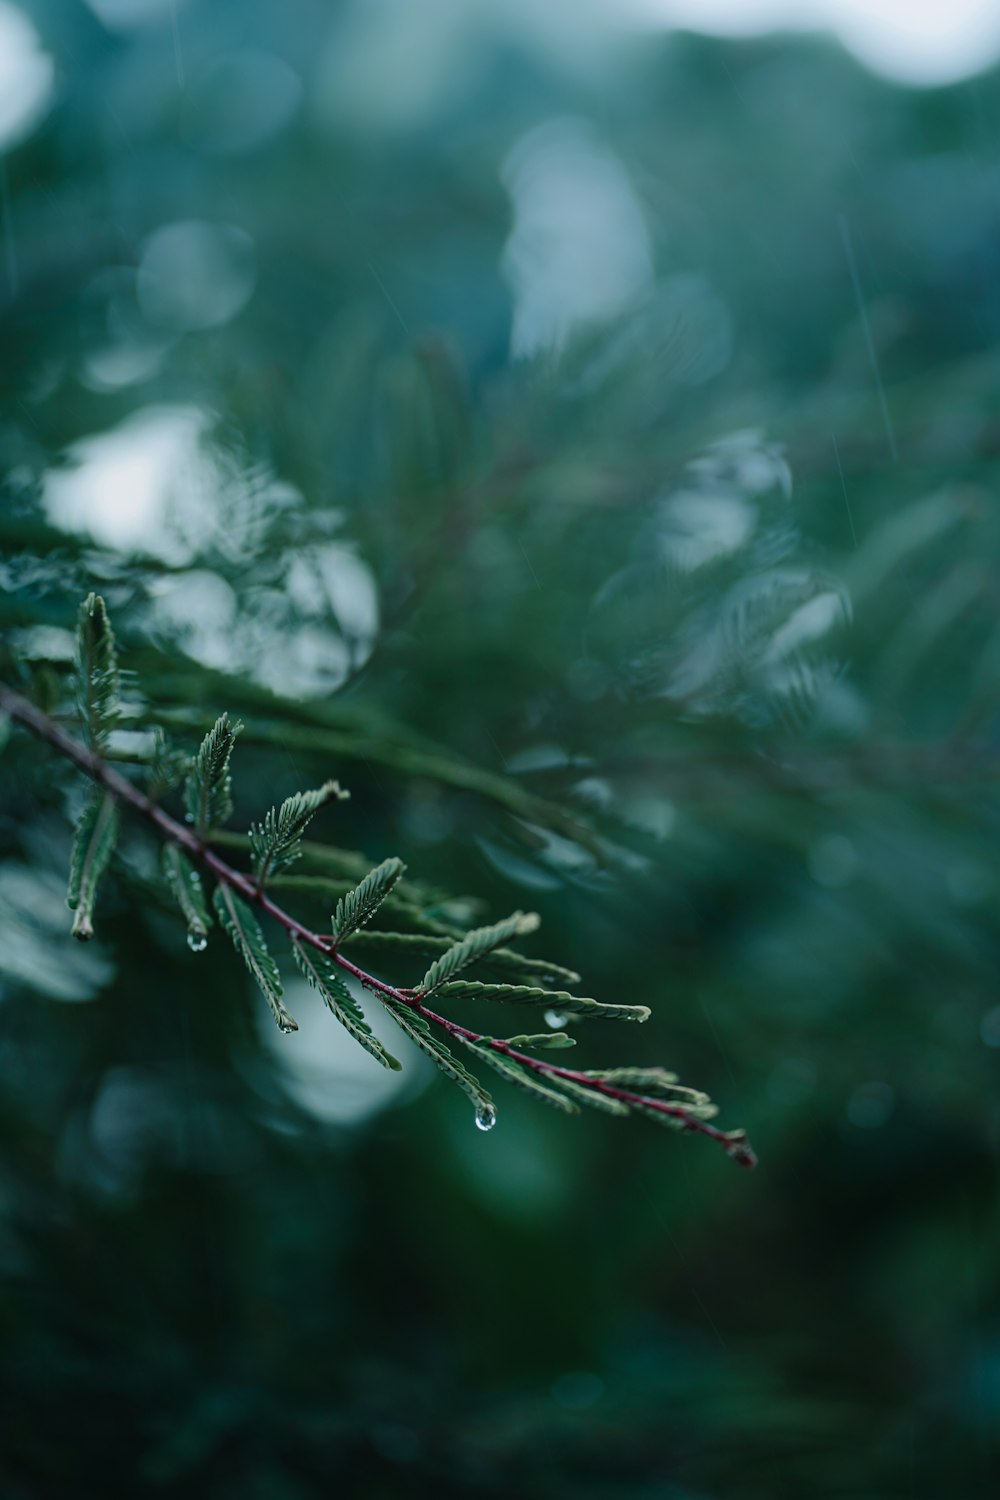 a branch of a pine tree with drops of water on it